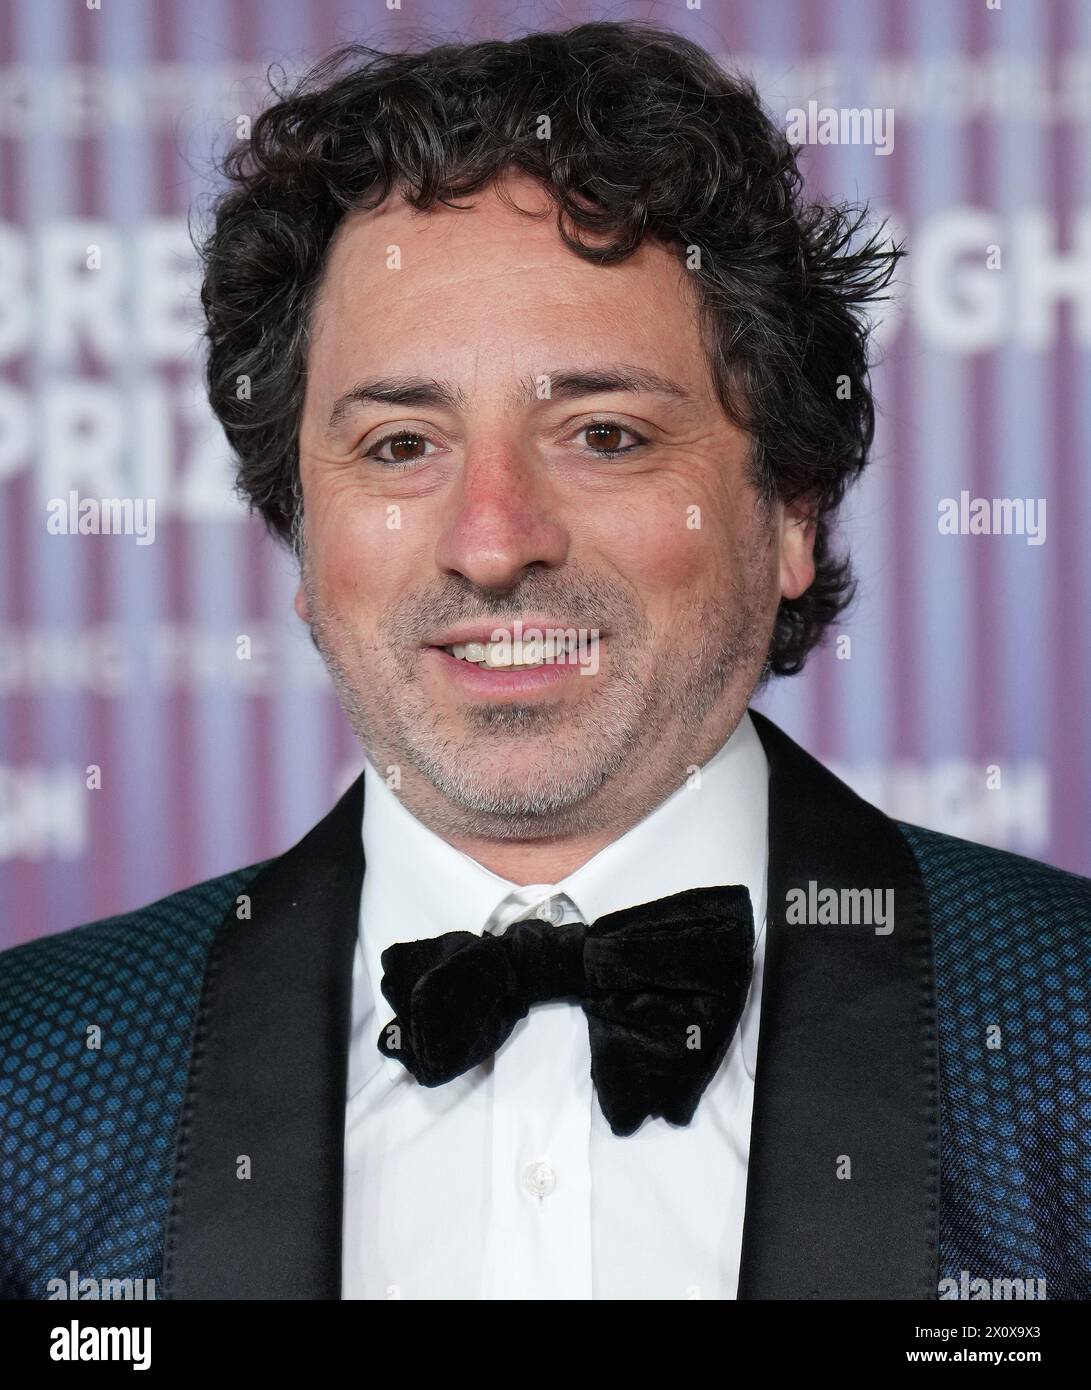 Co-Founder of GOOGLE and Founder of ALPHABET, Sergey Brin arrives at the 10th Annual Breakthrough Prize Ceremony held at the Academy Museum of Motion Picture in Los Angeles, CA on Saturday, ?April 13, 2024. (Photo By Sthanlee B. Mirador/Sipa USA) Stock Photo